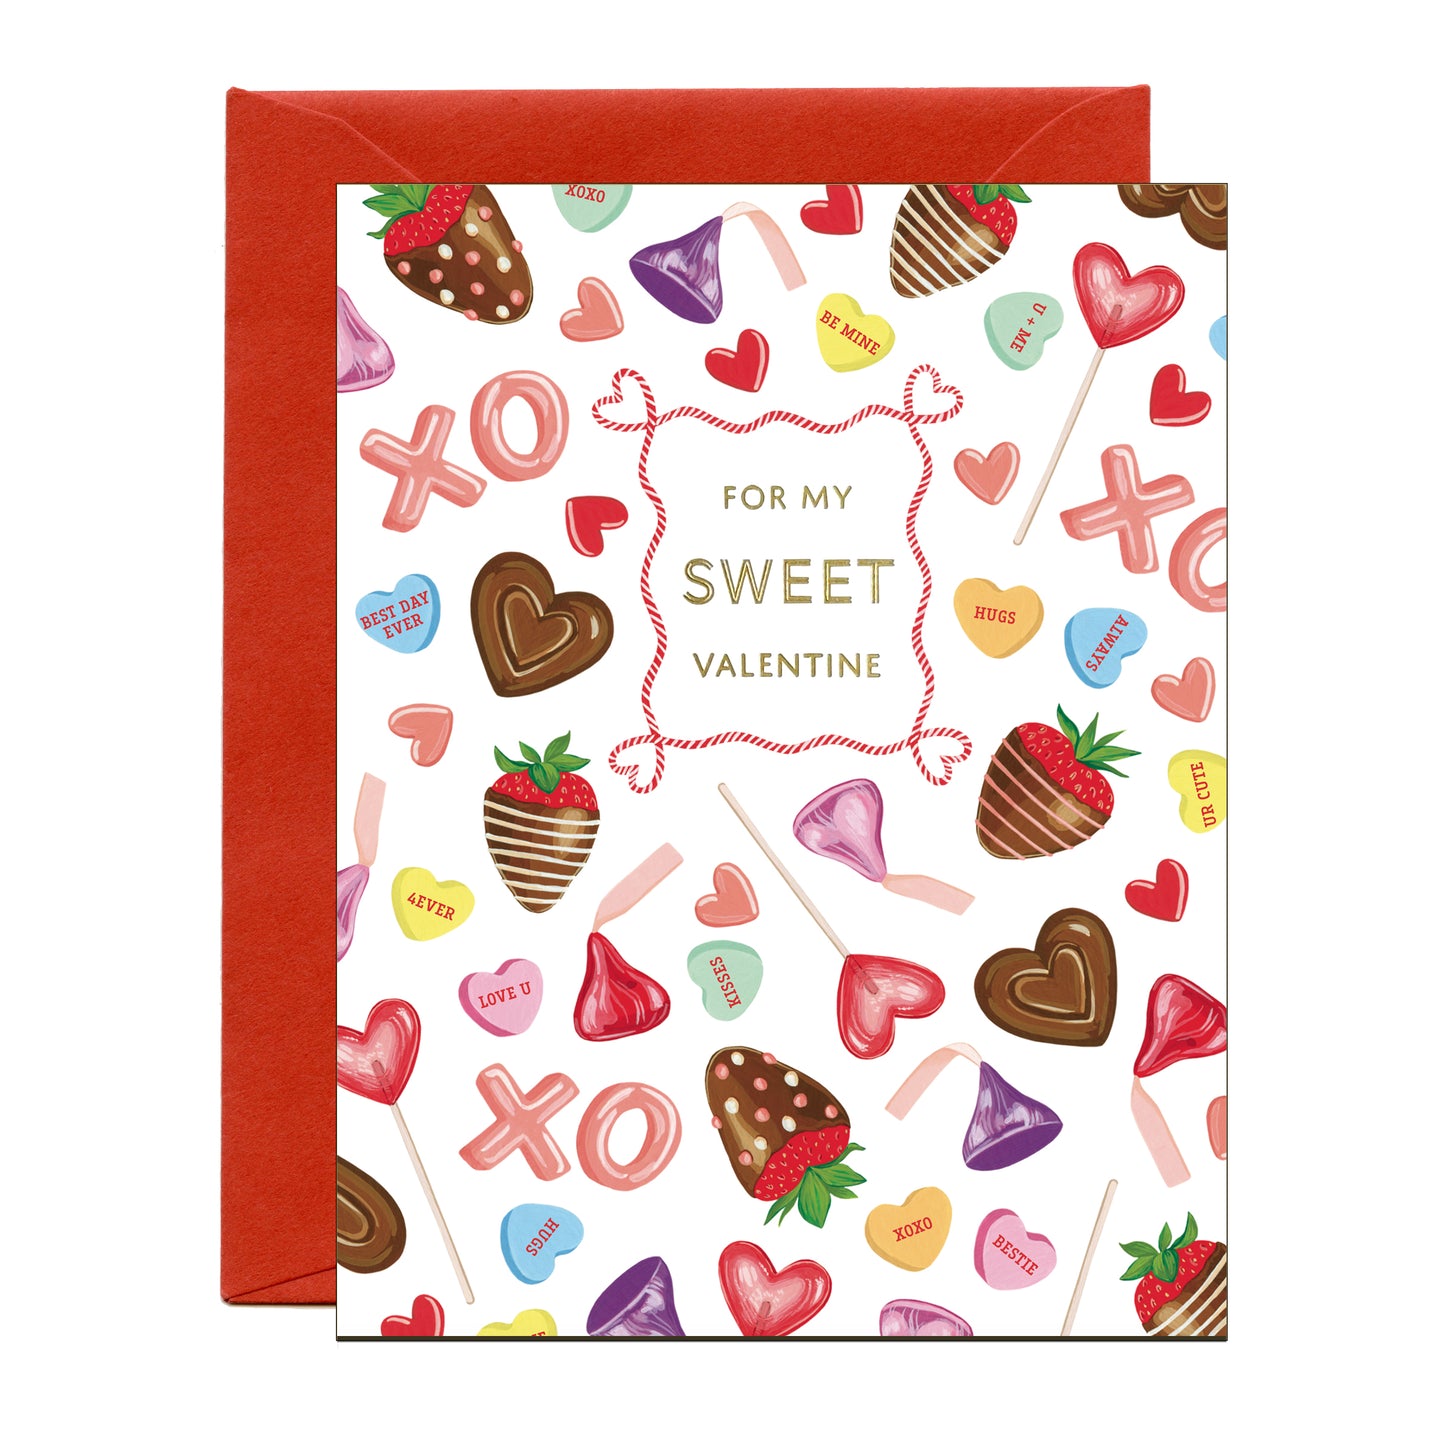 SWEET CANDY - VALENTINE'S DAY GREETING CARD